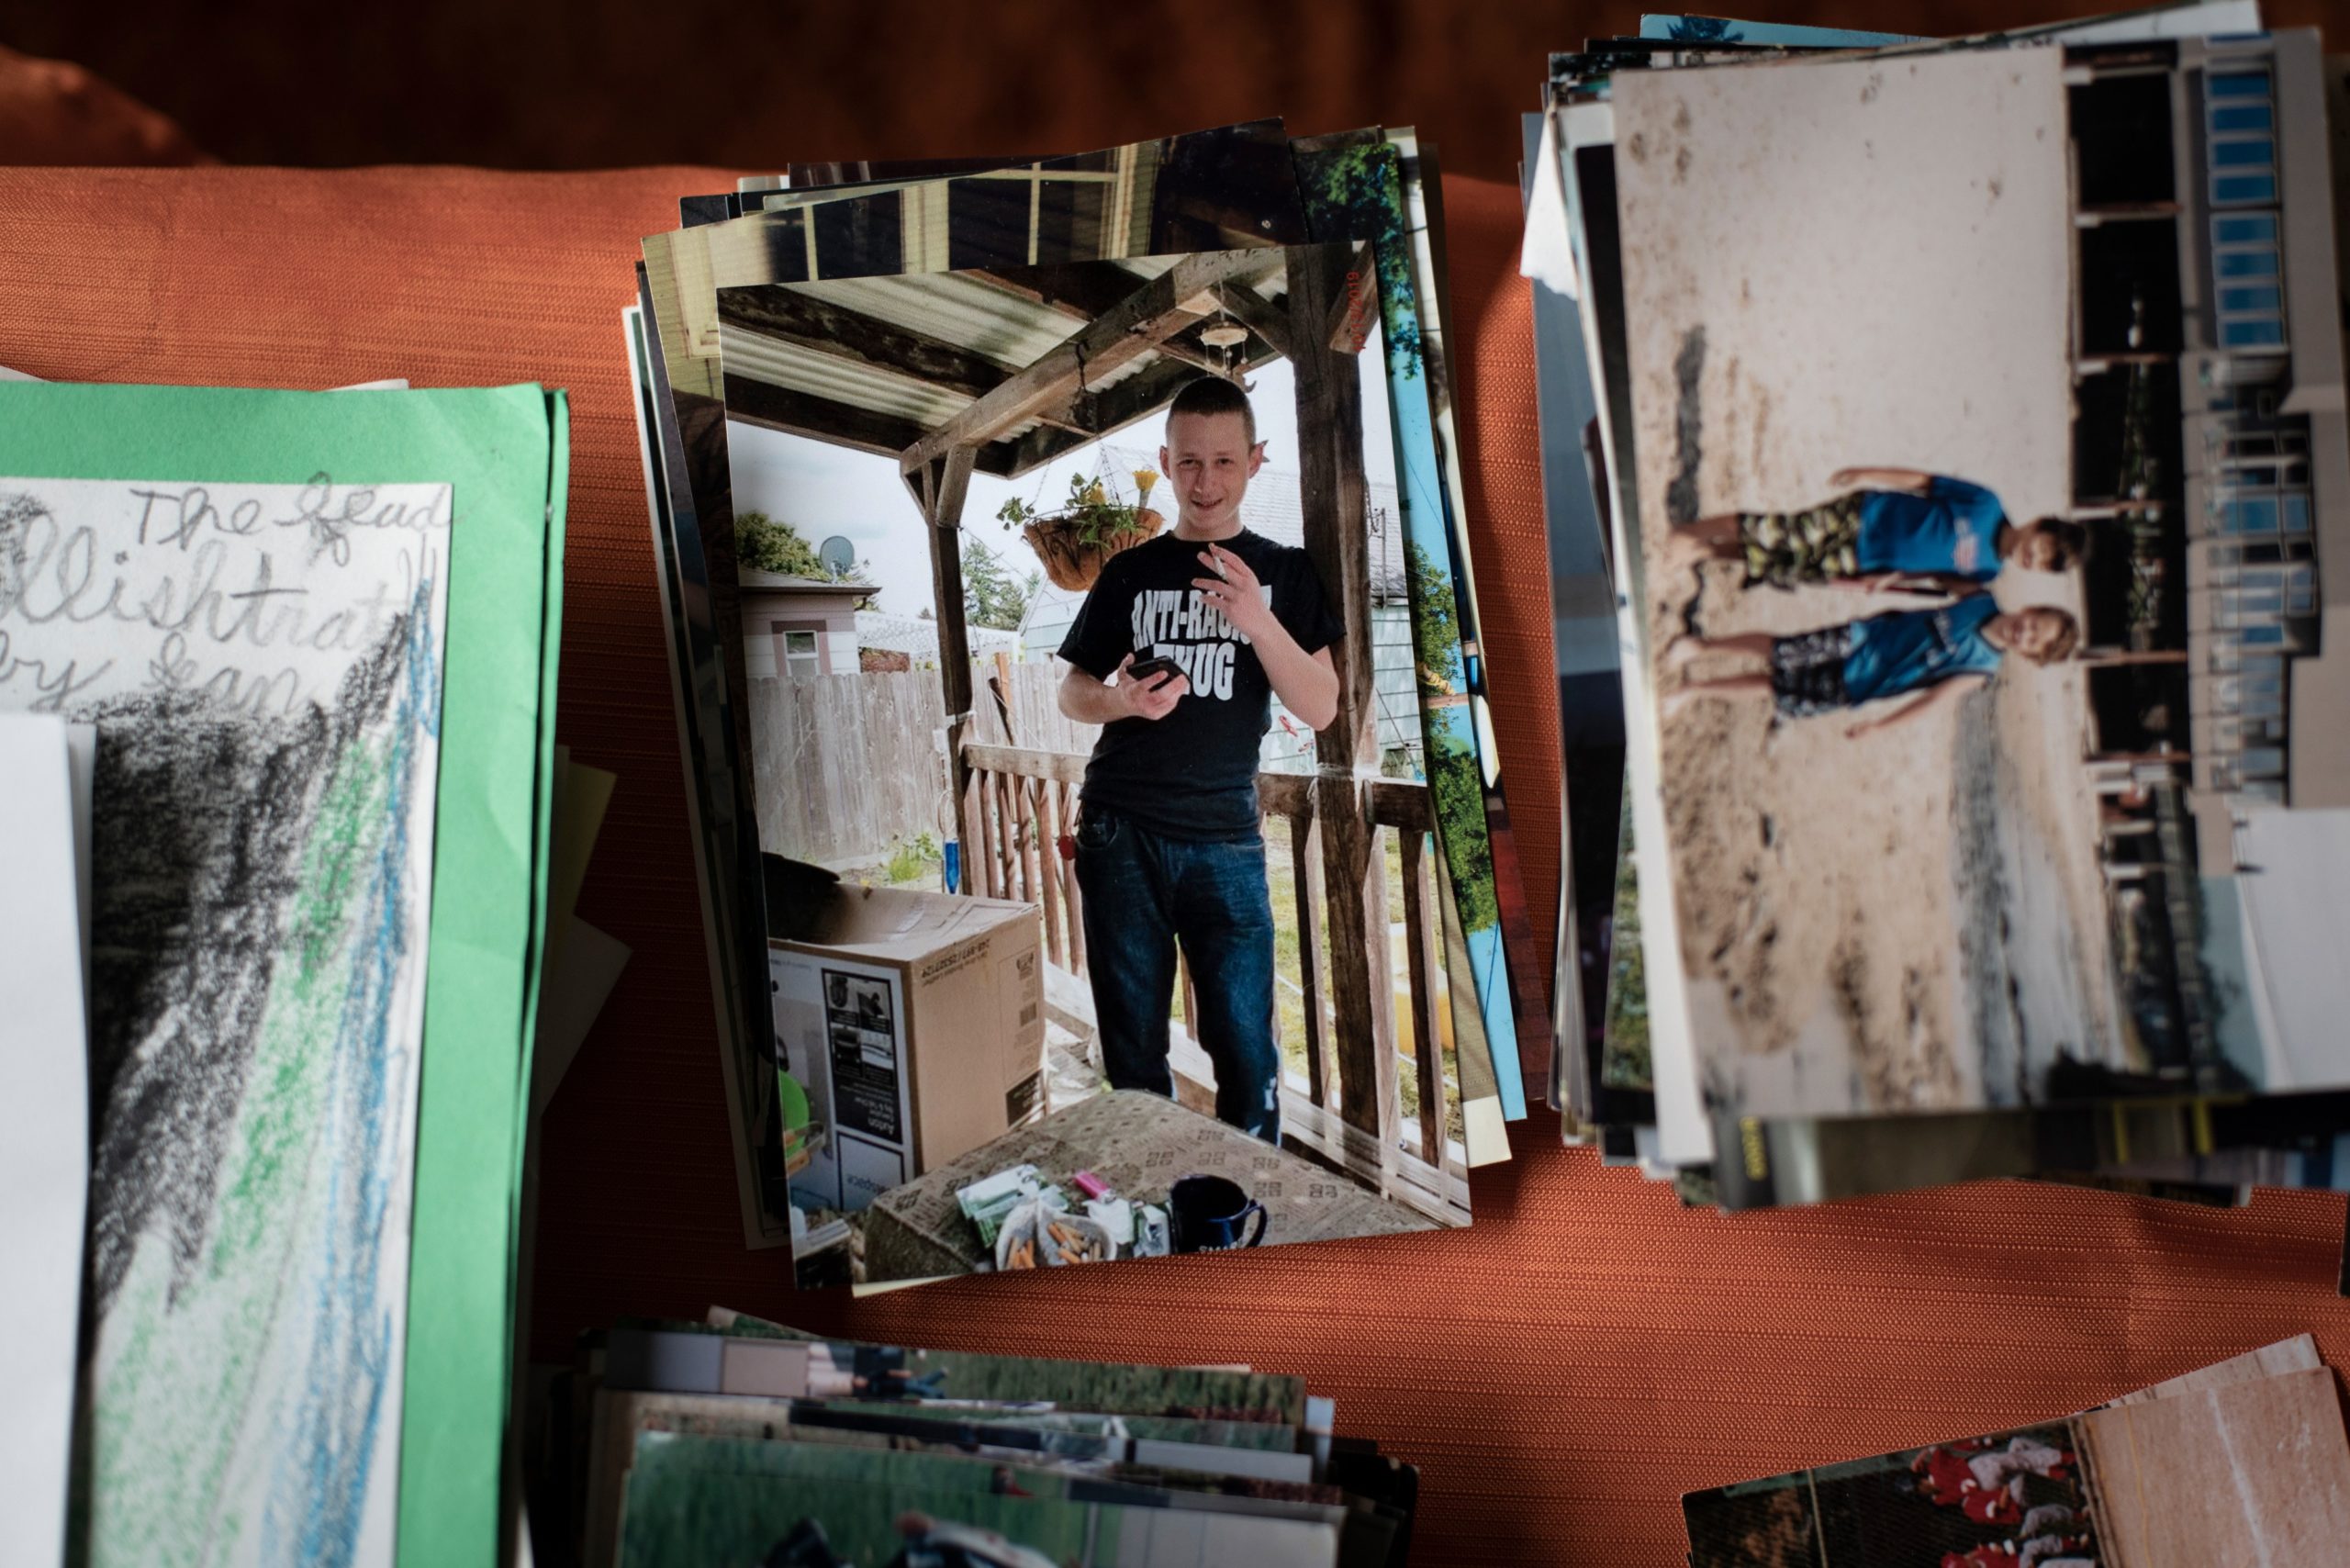 Photos and mementoes of Sean Kealiher, a Portland activist killed in 2019, are seen in his mother's home in Portland, Oregon, on January 30, 2021. In the center photo, Sean is wearing a shirt which reads, "Anti-Racist Thug," and on the right is a photo of him and his brother on an Oregon beach. Brooke Herbert for The Intercept